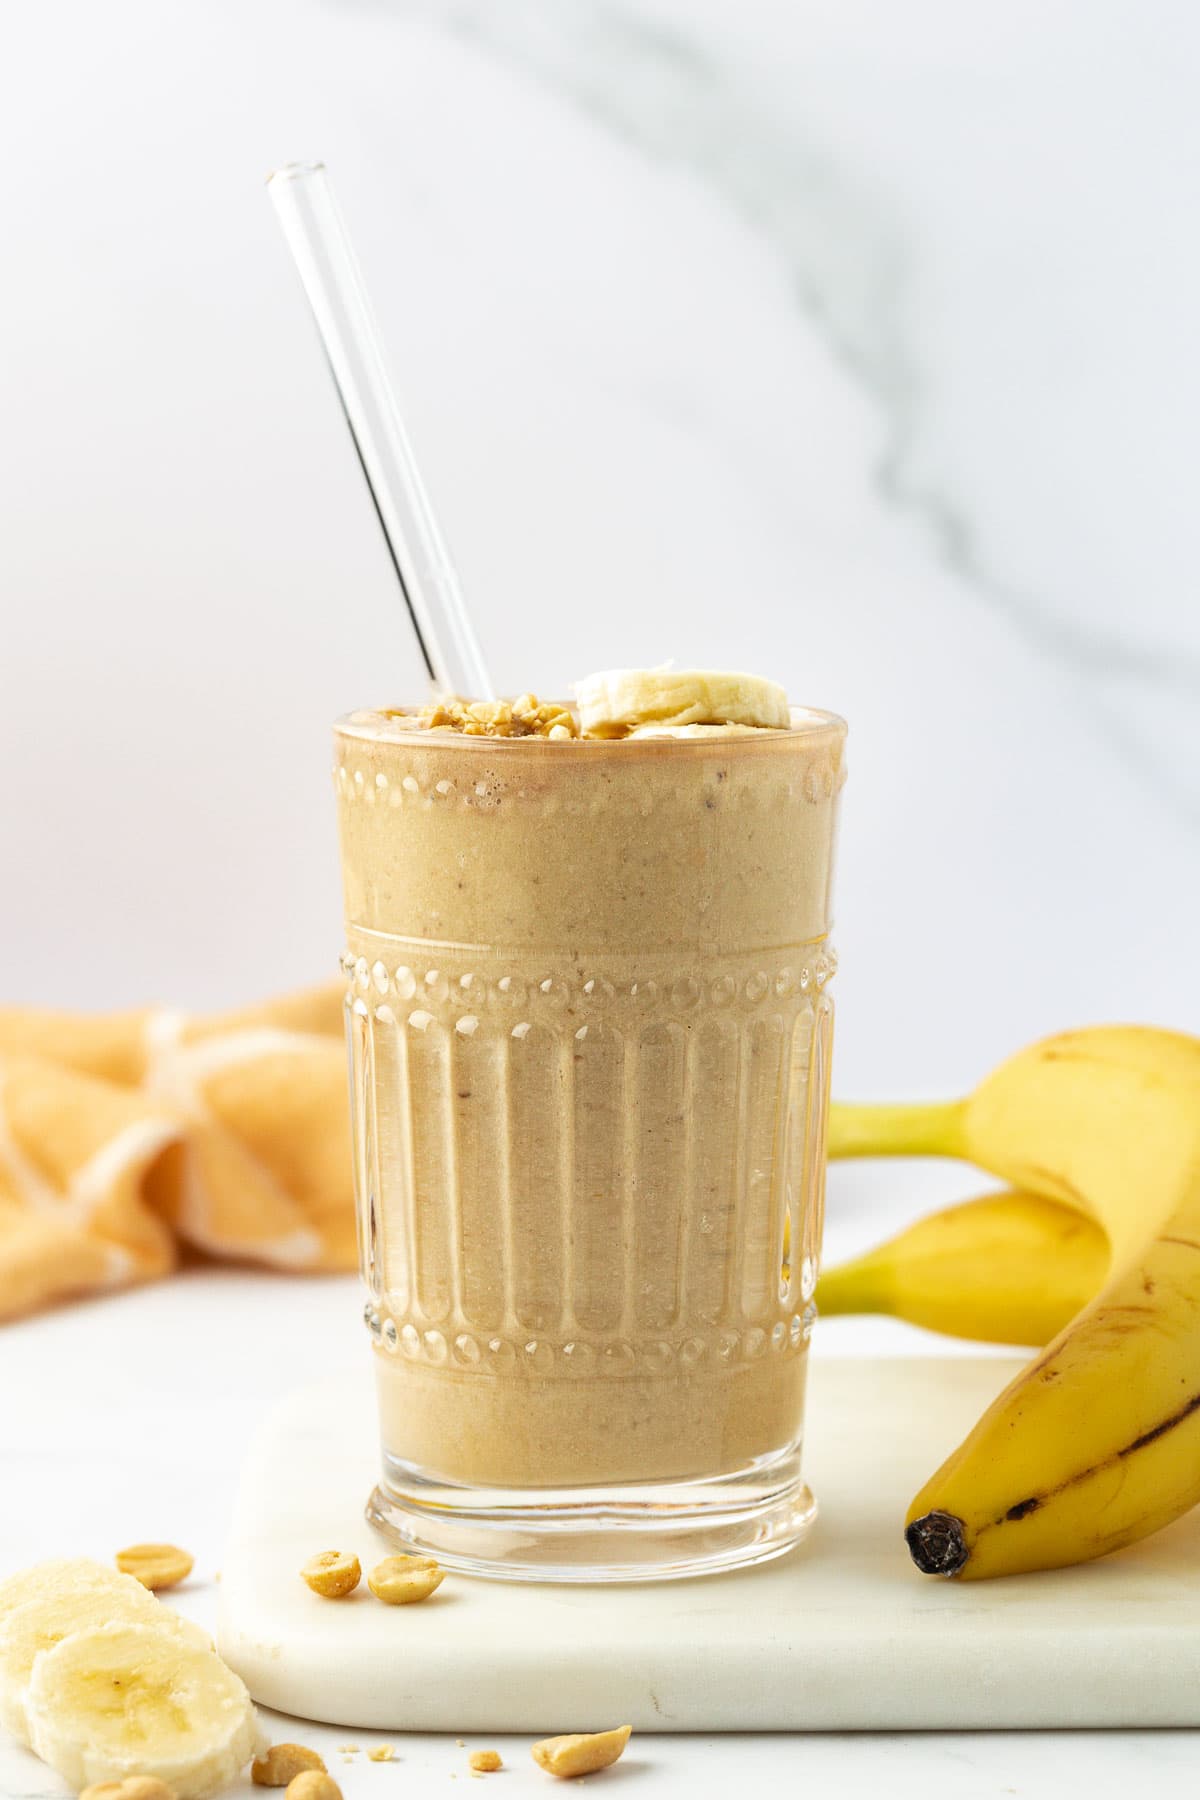 peanut butter banana smoothie in a glass with a straw